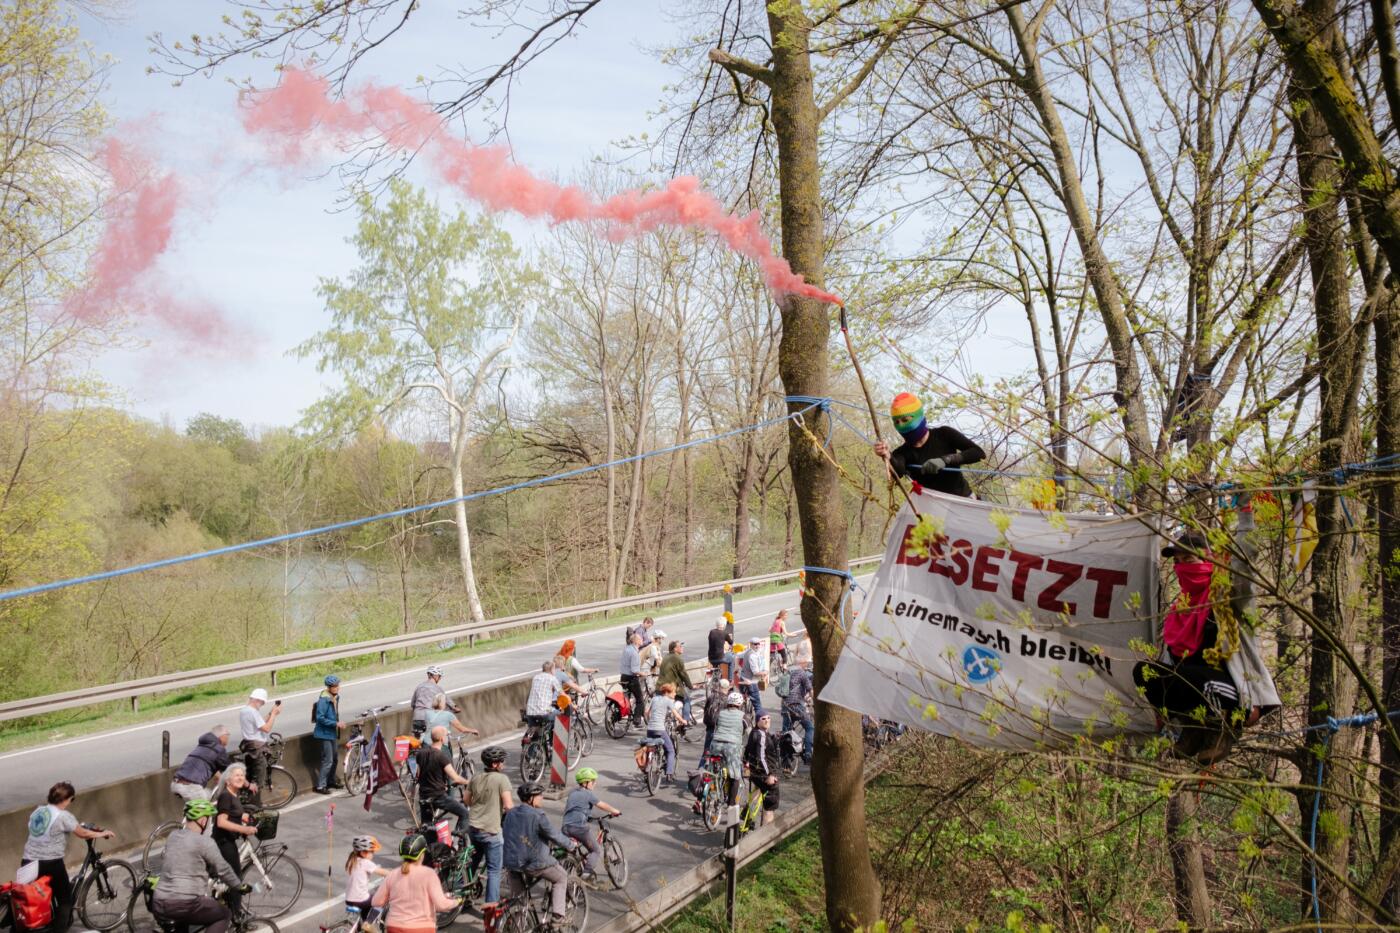 Activists on bikes cycle on the road under the canopy of trees, with activists in the trees holding up a large sign that reads "Besetzt Leinemasch bleibt"